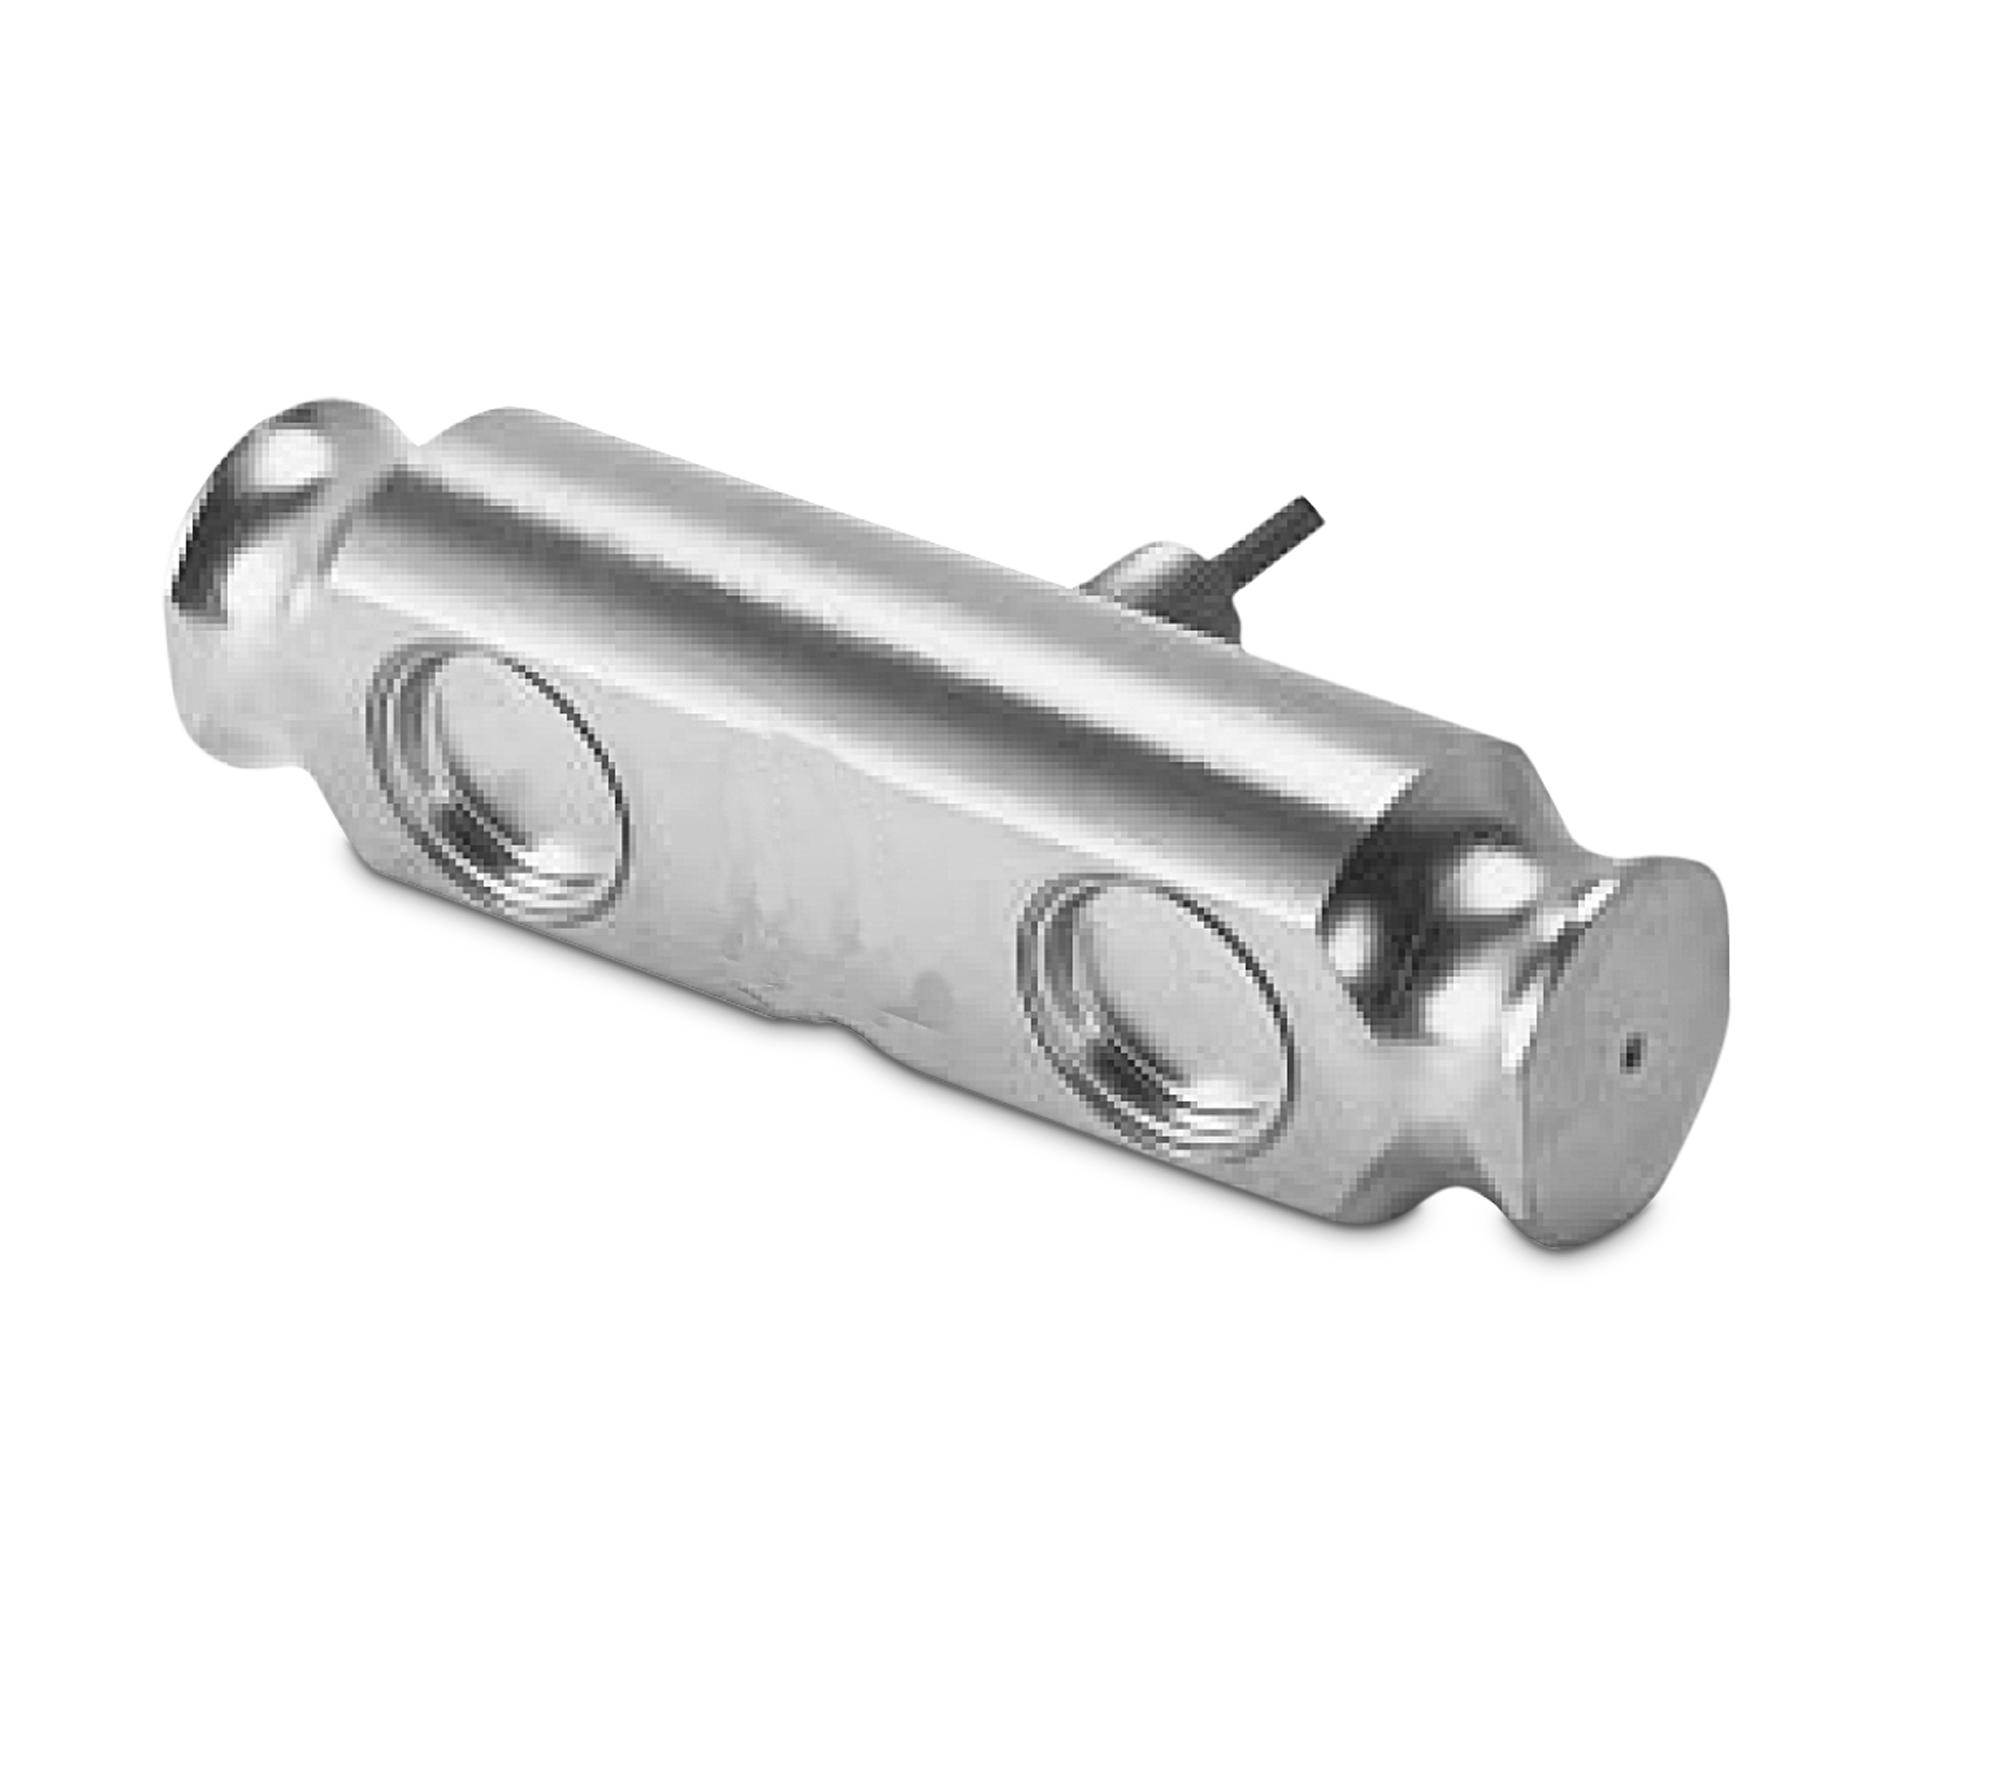 Cardinal load cell, Cardinal Scale parts, Specialty scale,certified load cell, water resistant load cell, outdoor load cell